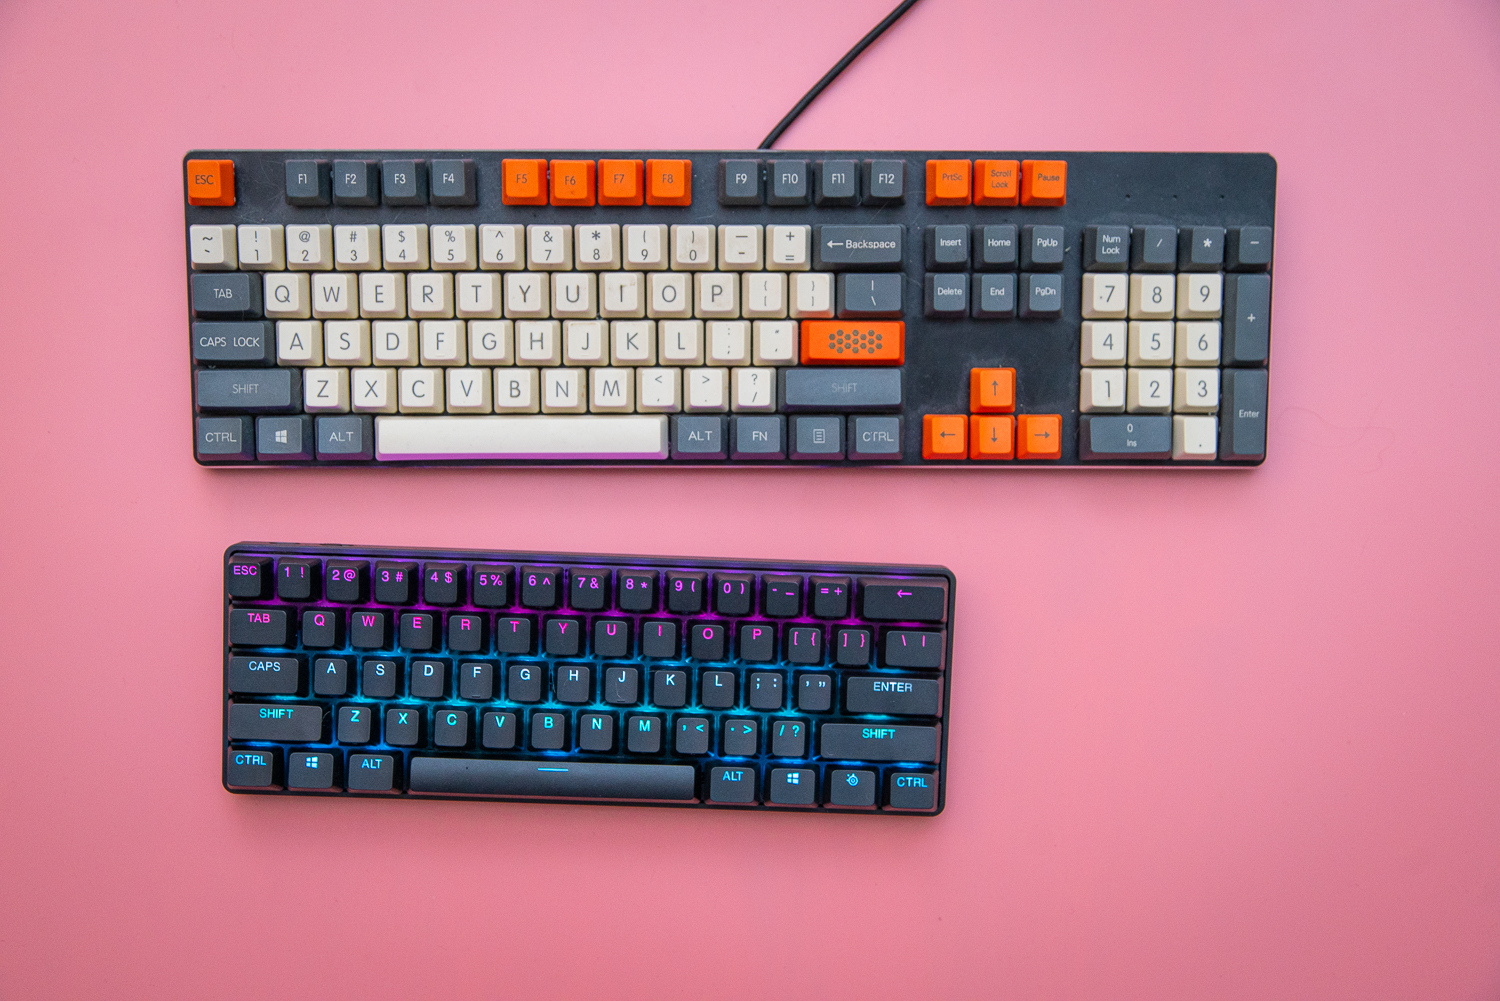 SteelSeries Apex Pro Mini review: An enthusiast's keyboard